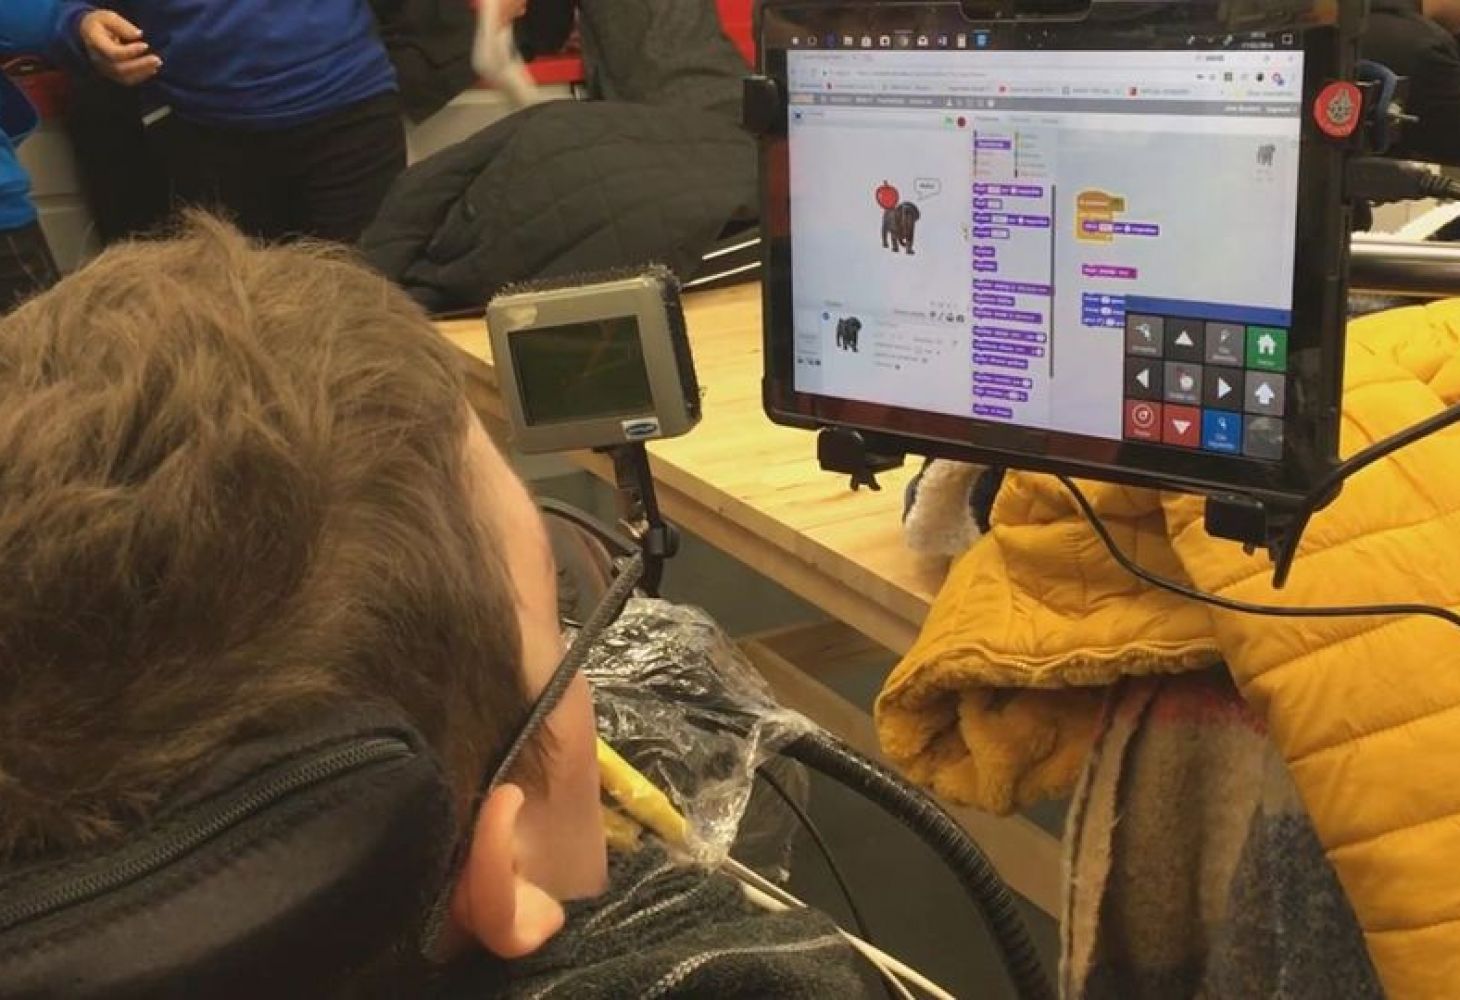 Coder Dojo, inclusive programming clubs for young people